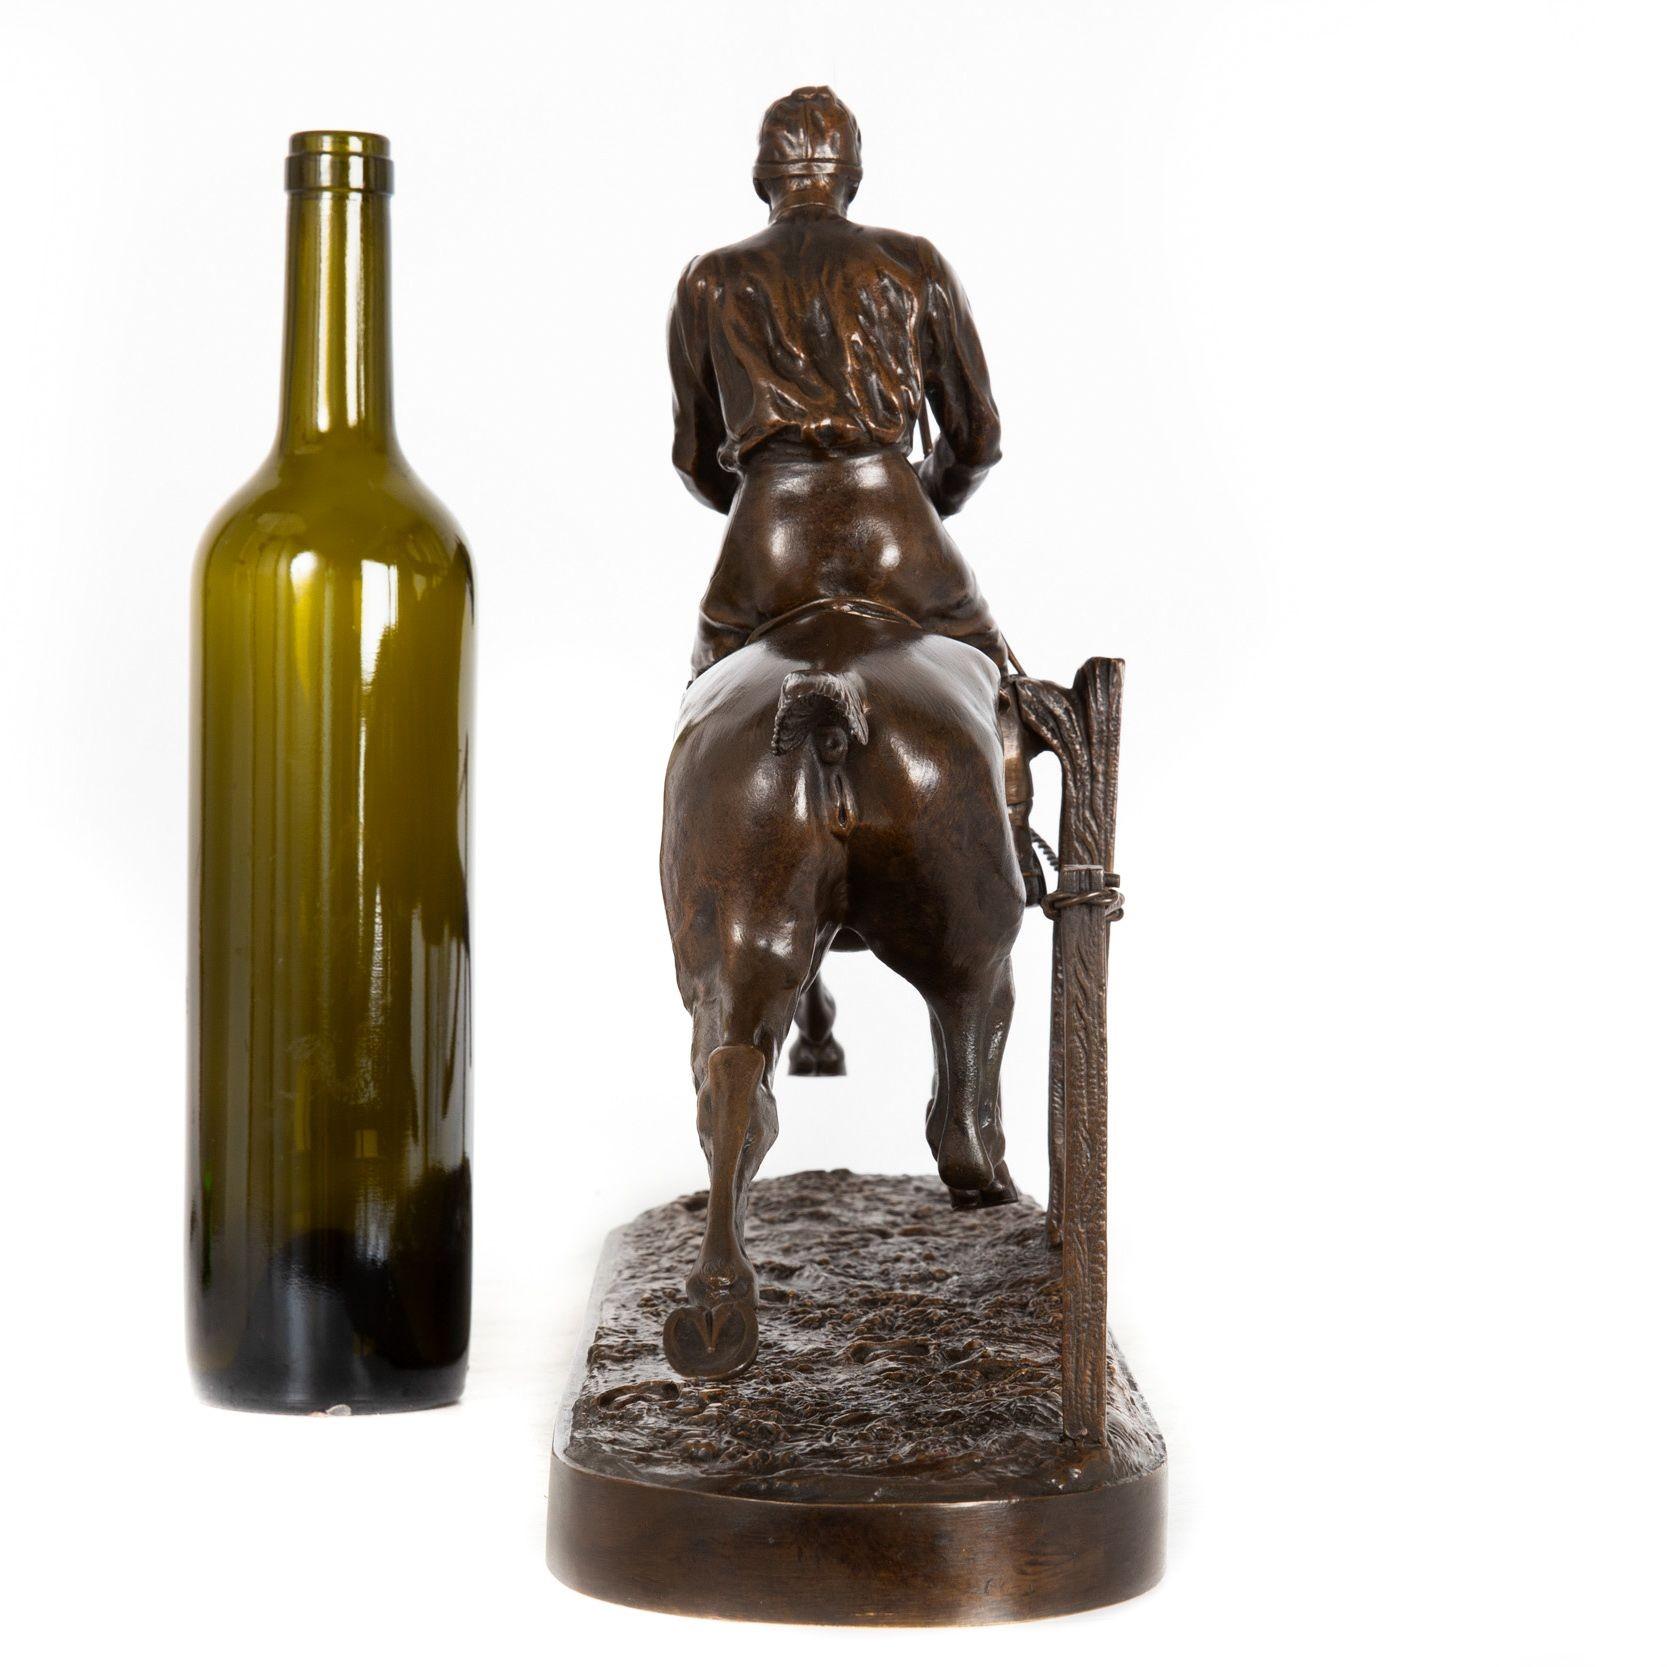 French Antique Bronze Sculpture of Jockey on Race Horse by H.R. de Vains In Good Condition For Sale In Shippensburg, PA